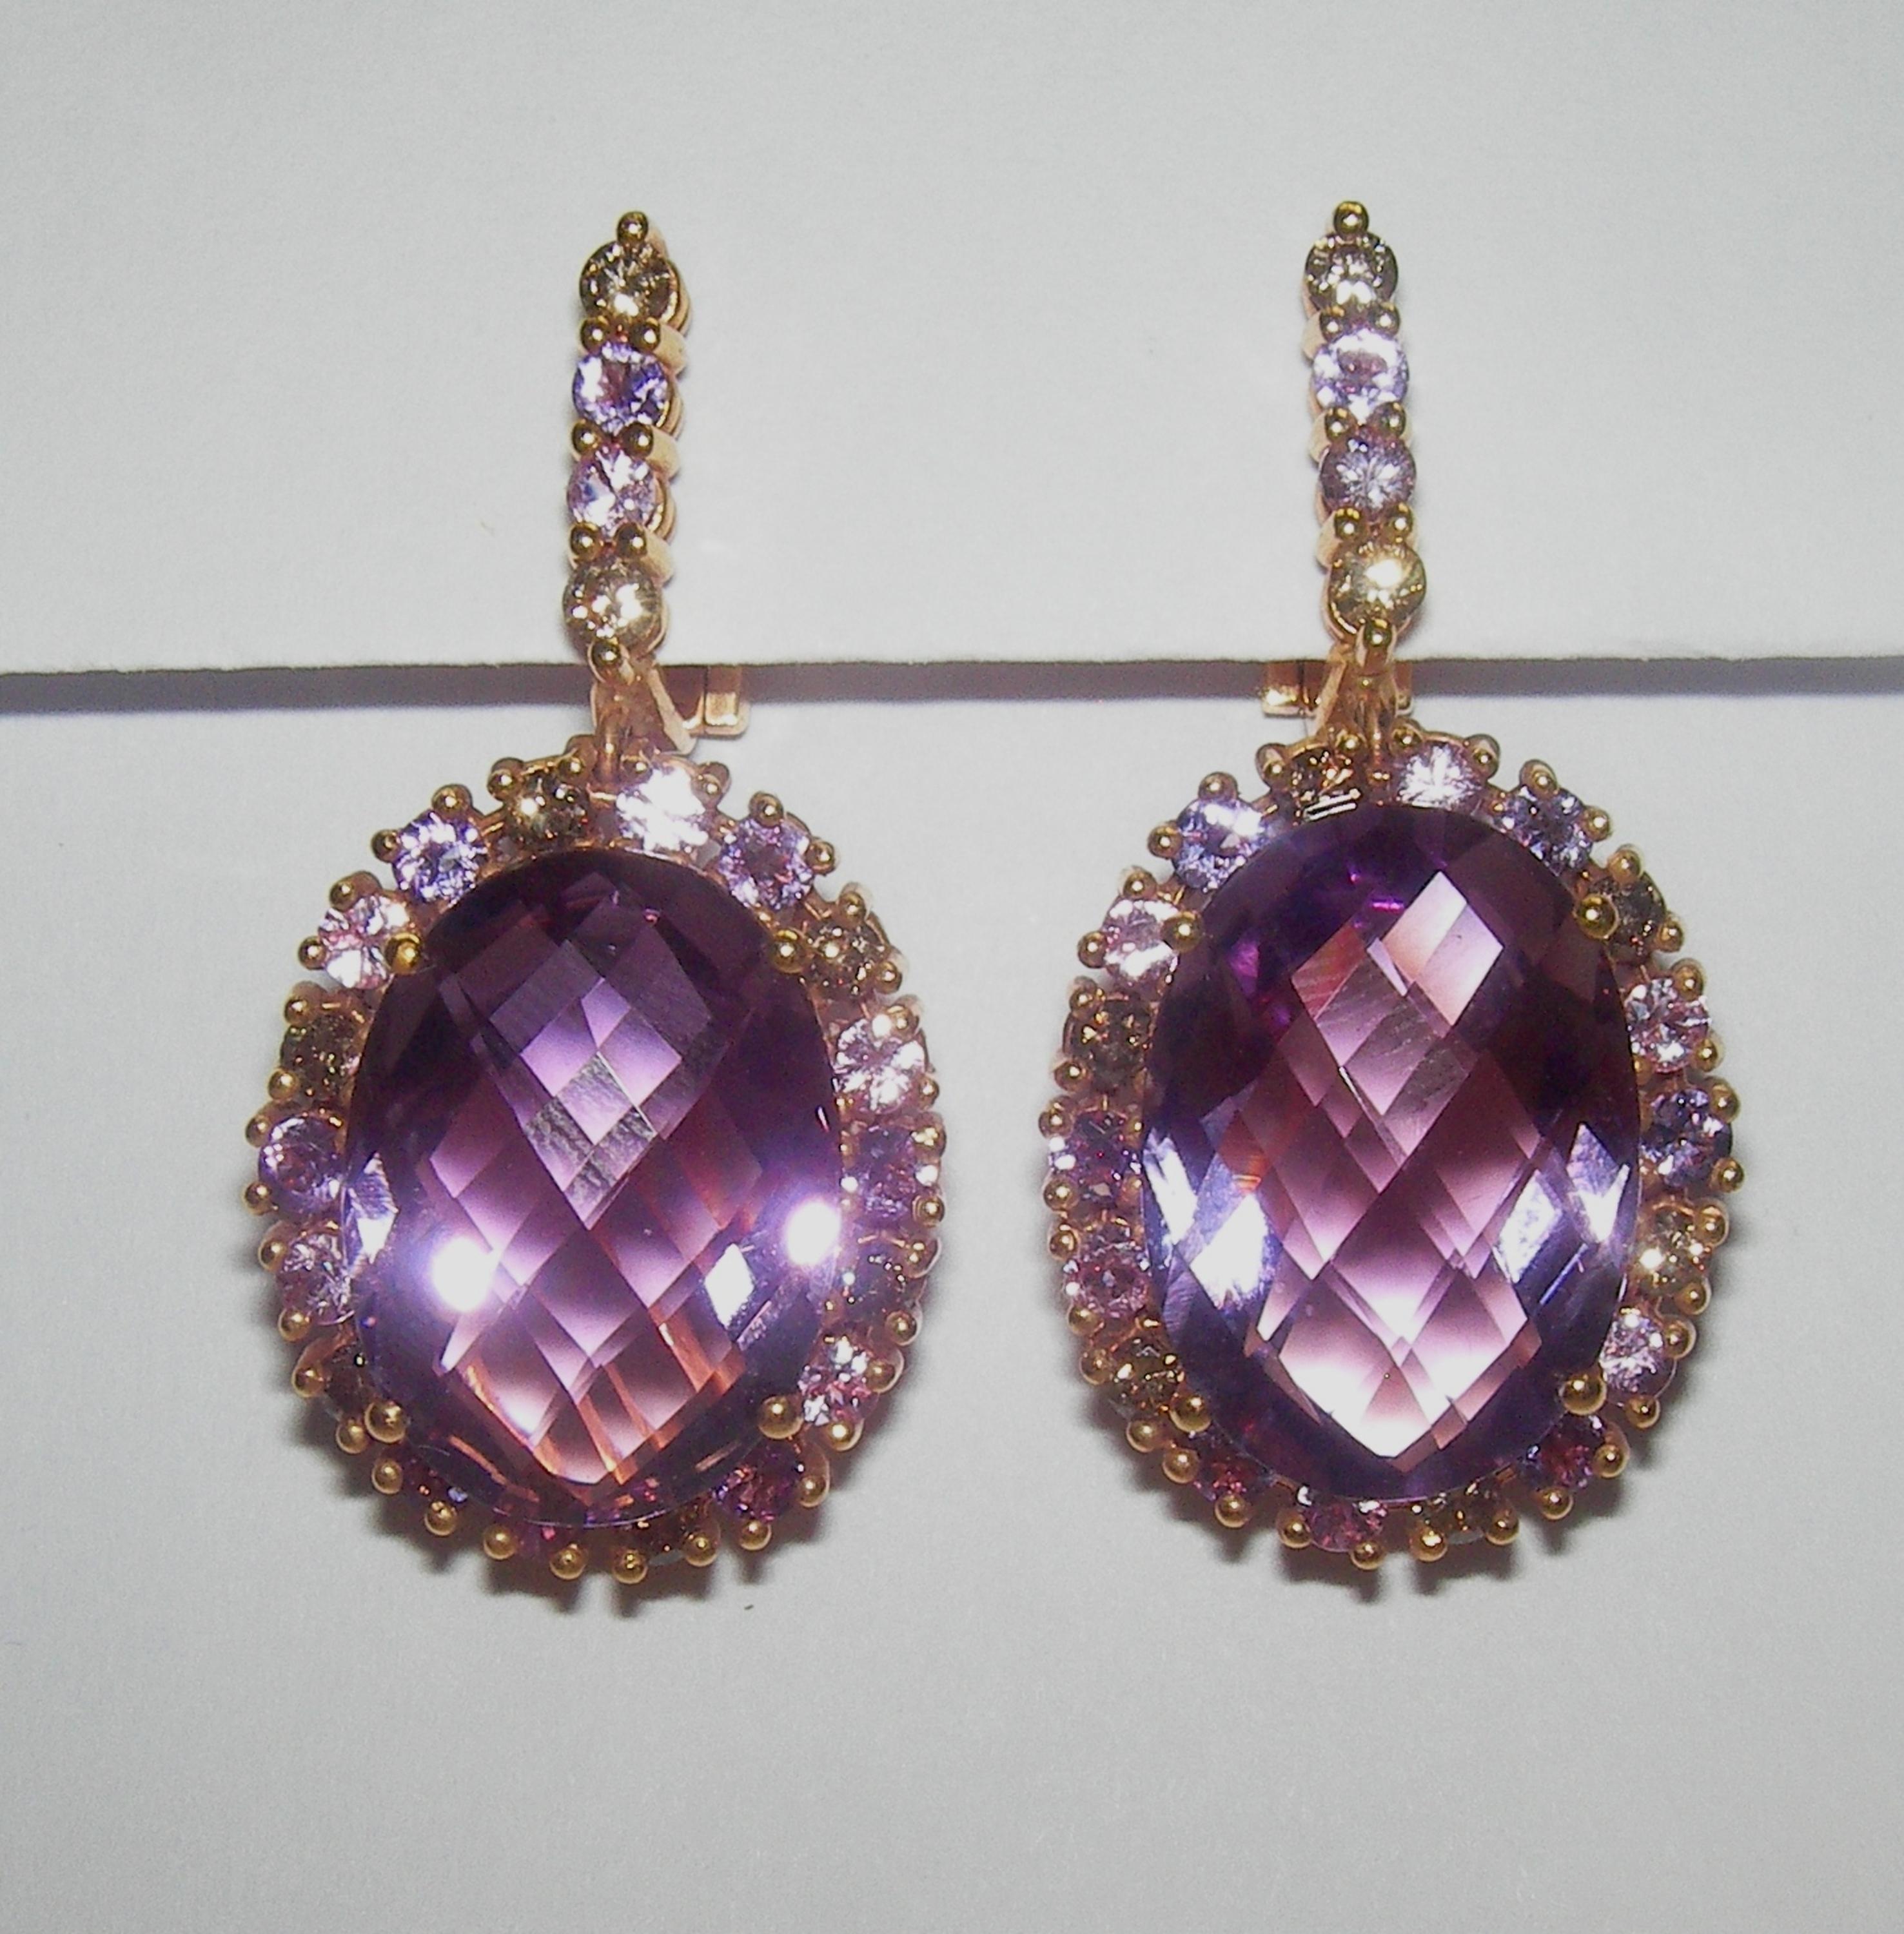 18 Karat Rose Gold Diamond  Amethyst and Pink Sapphire  Dangle Earrings



16 Diamonds Cognac  0.90 Carat 
21 Amethyst  1,22 Carat
12 Sapphire Pink 0,96 Carat
2 Amethyst 21,50 Carat




Founded in 1974, Gianni Lazzaro is a family-owned jewelery